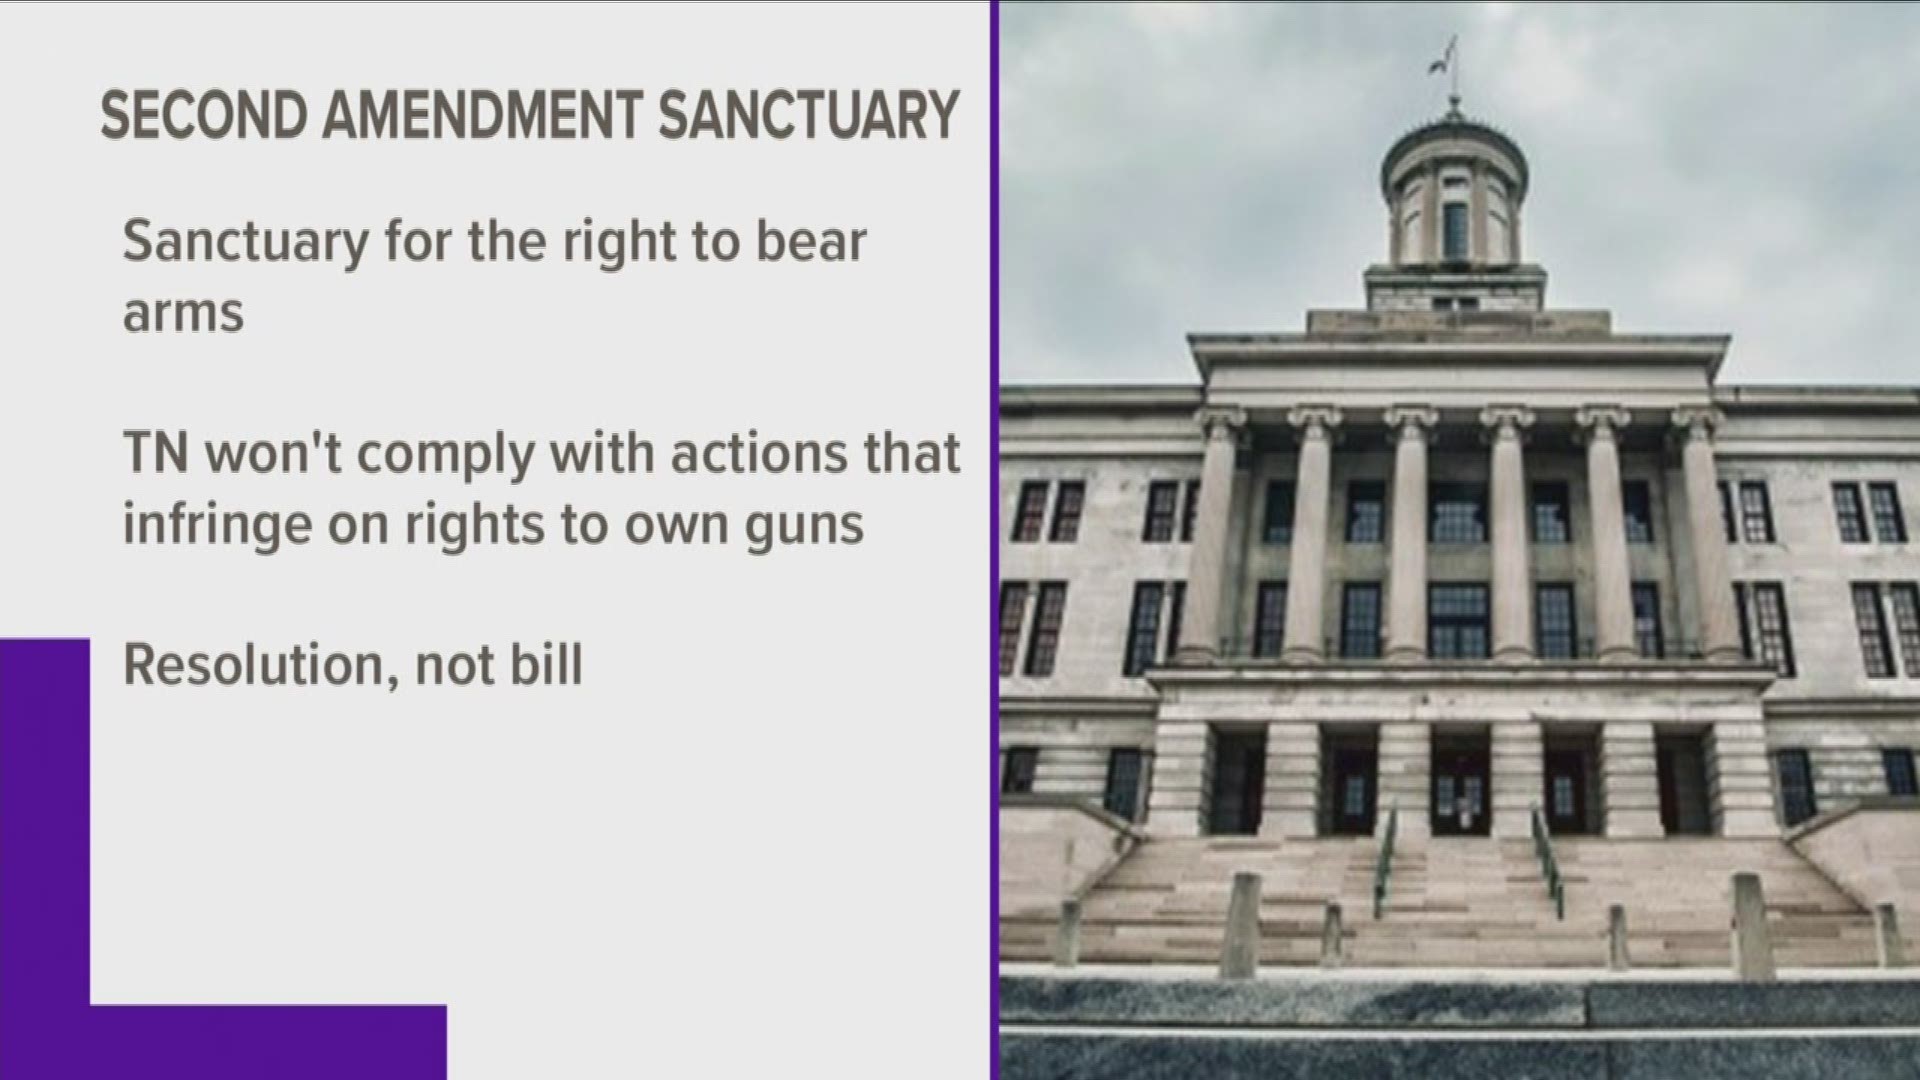 Seven East Tennessee counties already took symbolic votes in favor of becoming "gun sanctuaries."